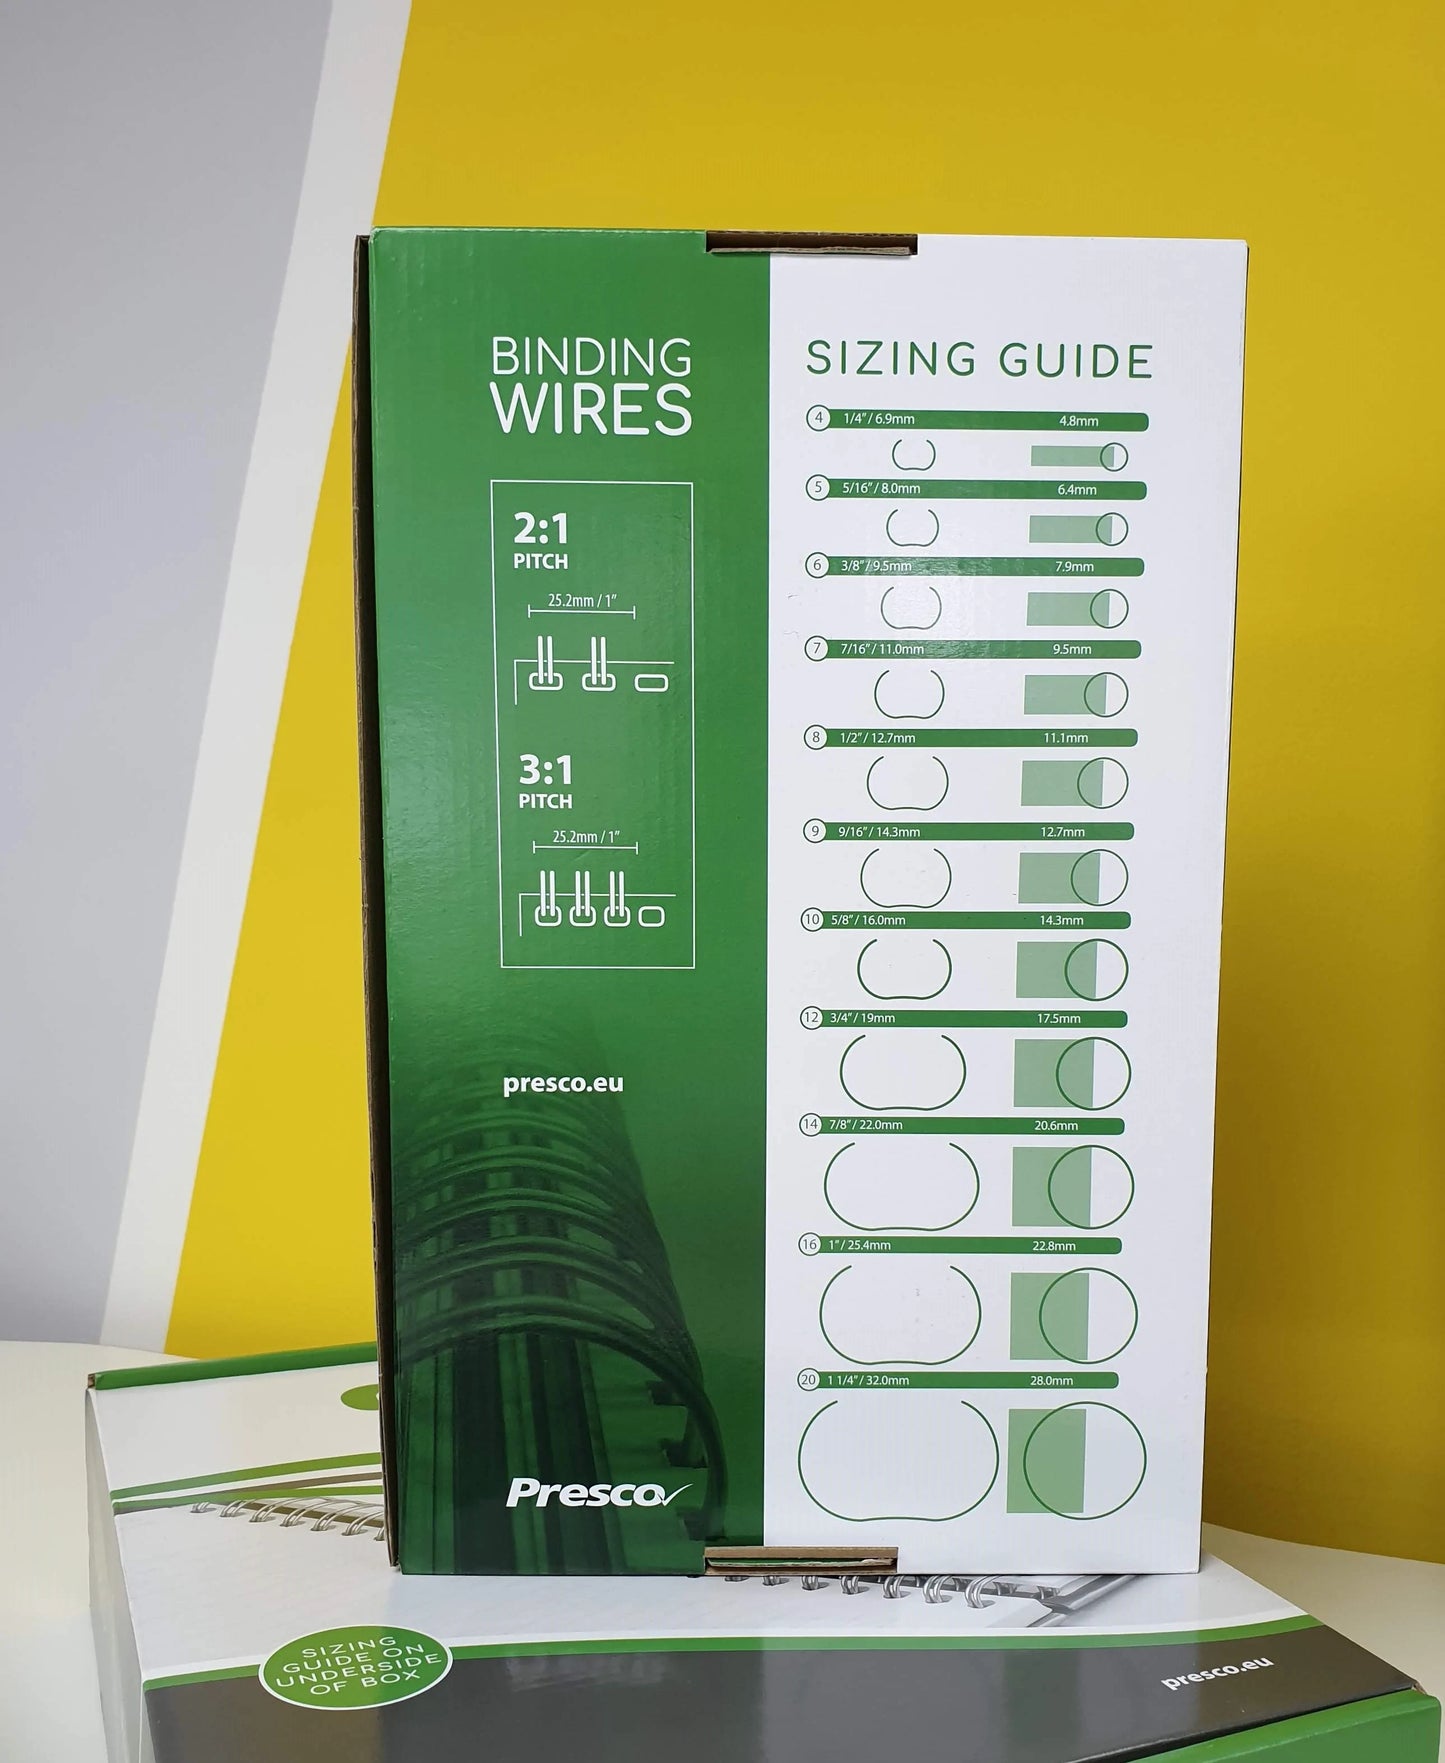 Presco Premium Binding Wires 3:1 Pitch A5 Wiro - 24 Loops